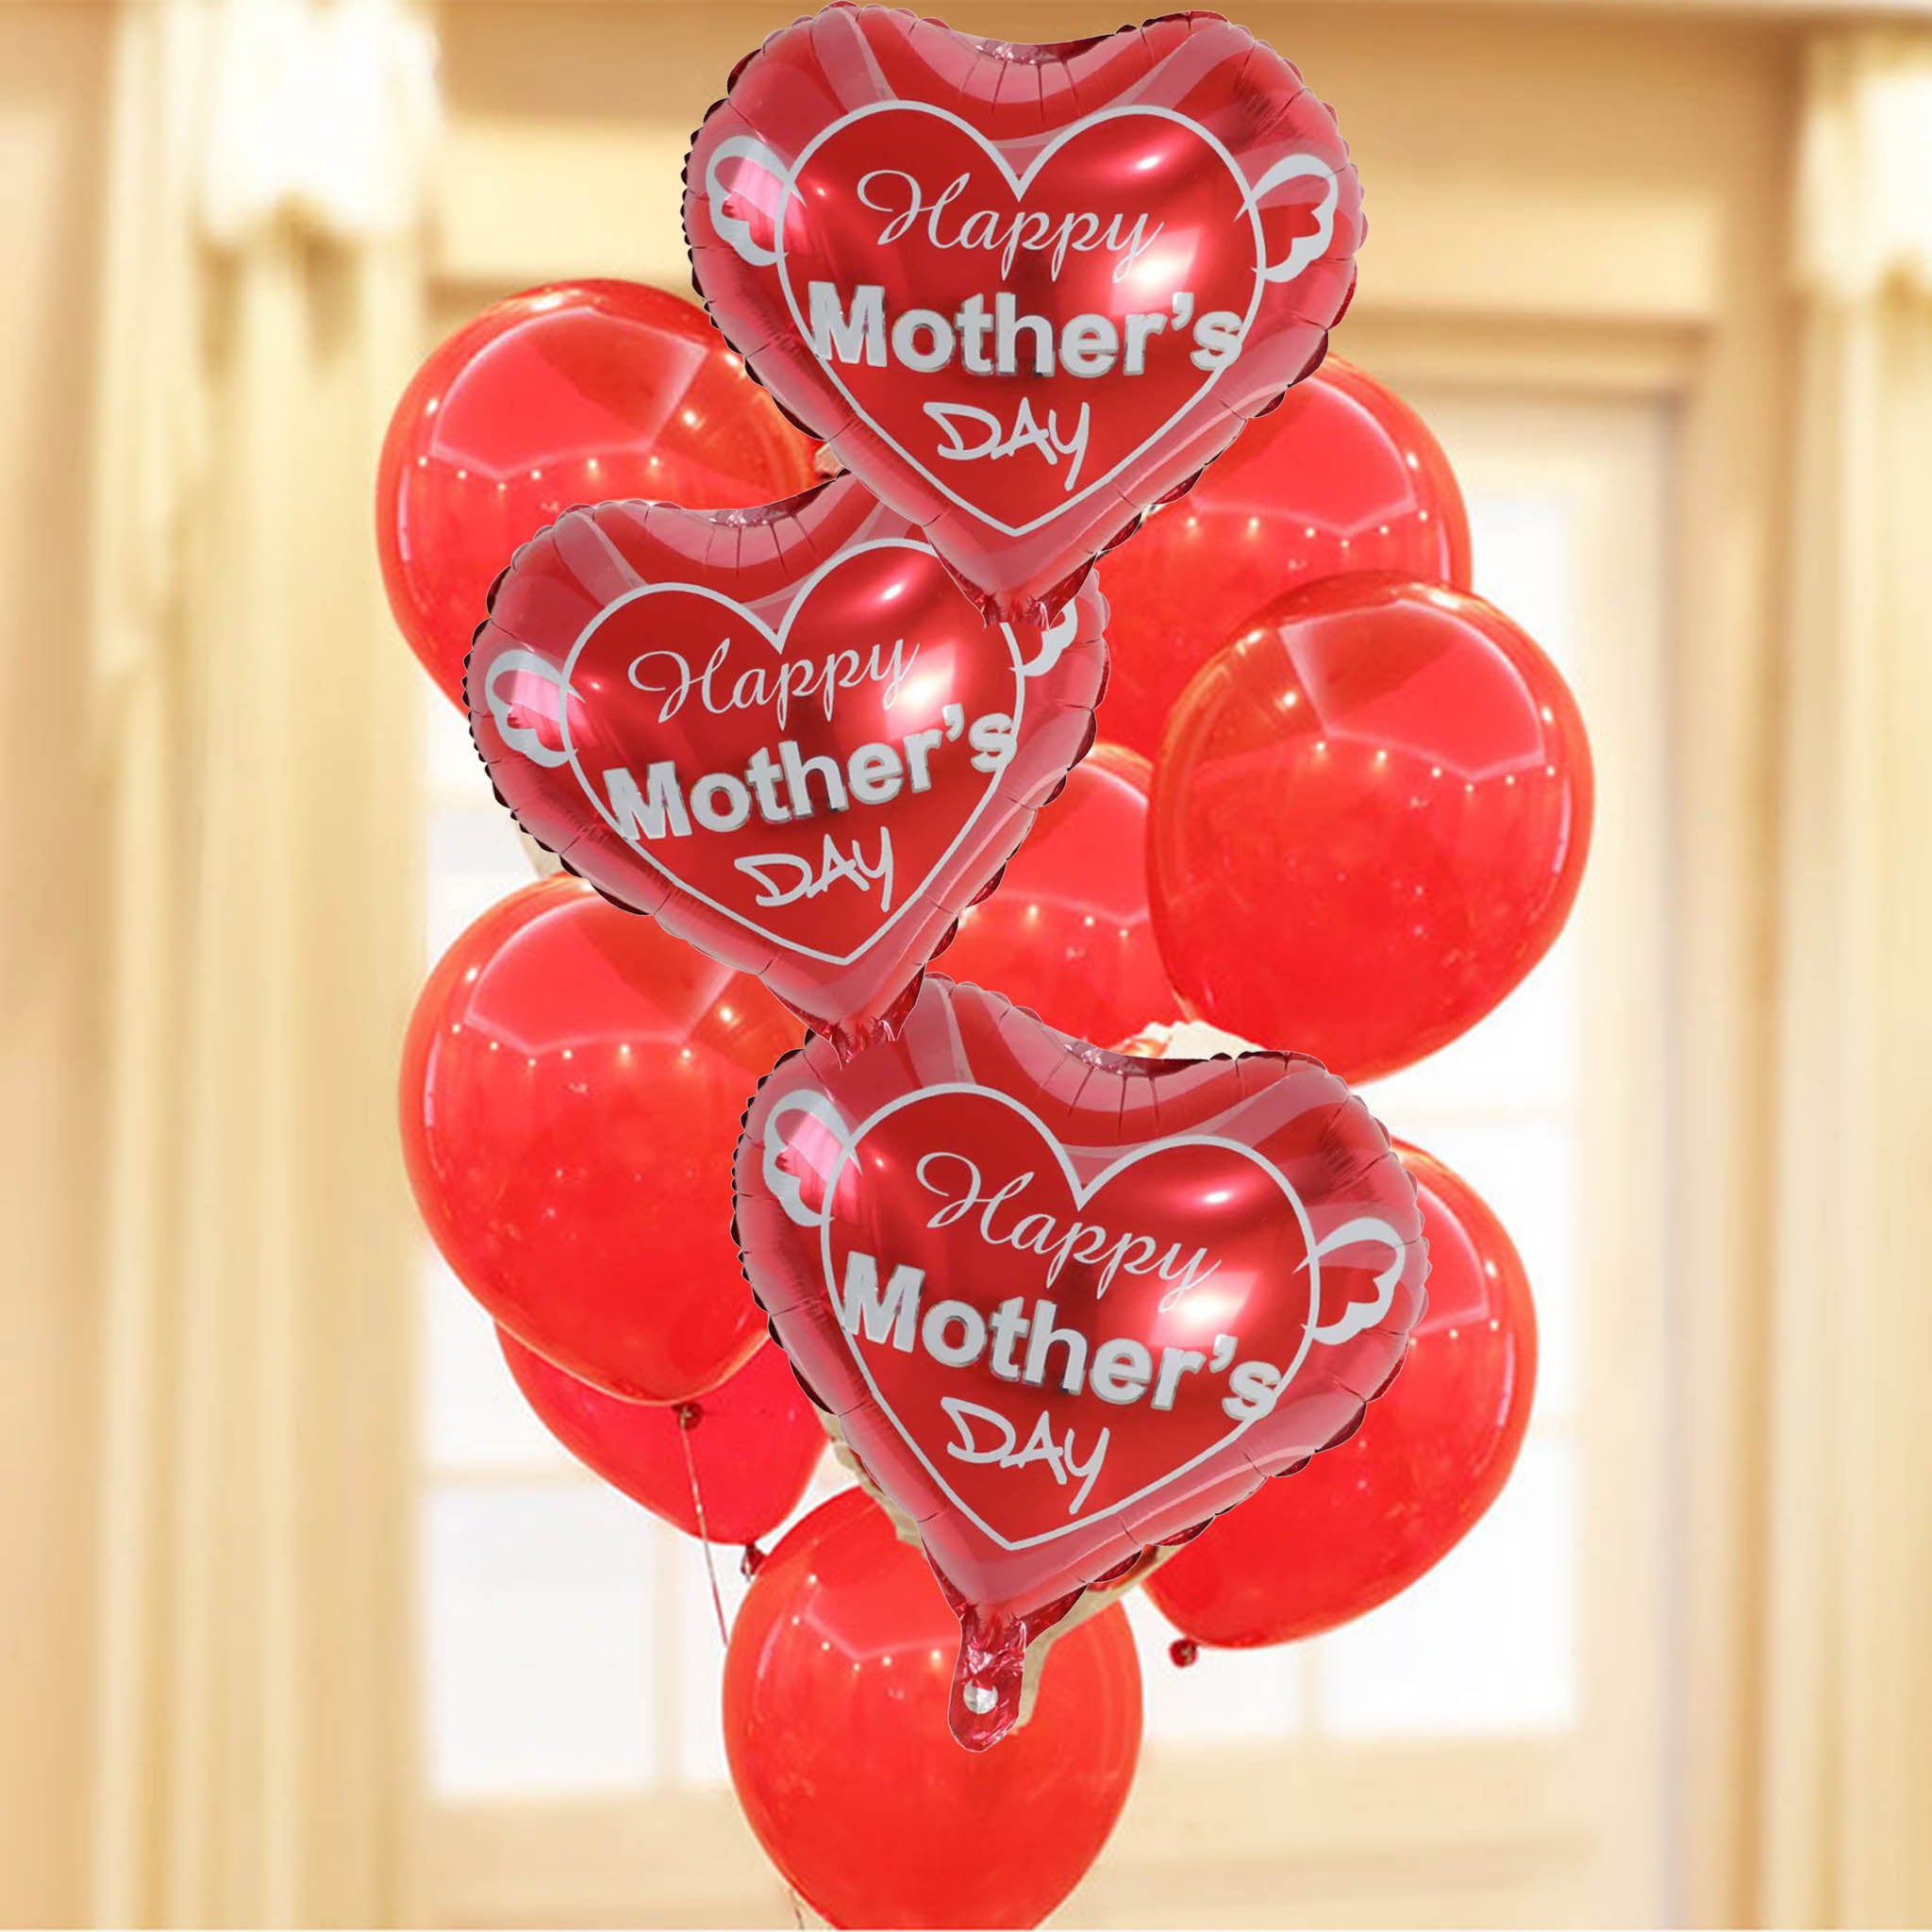 Send now happy mother's day balloons bouquet delivery in Dubai 